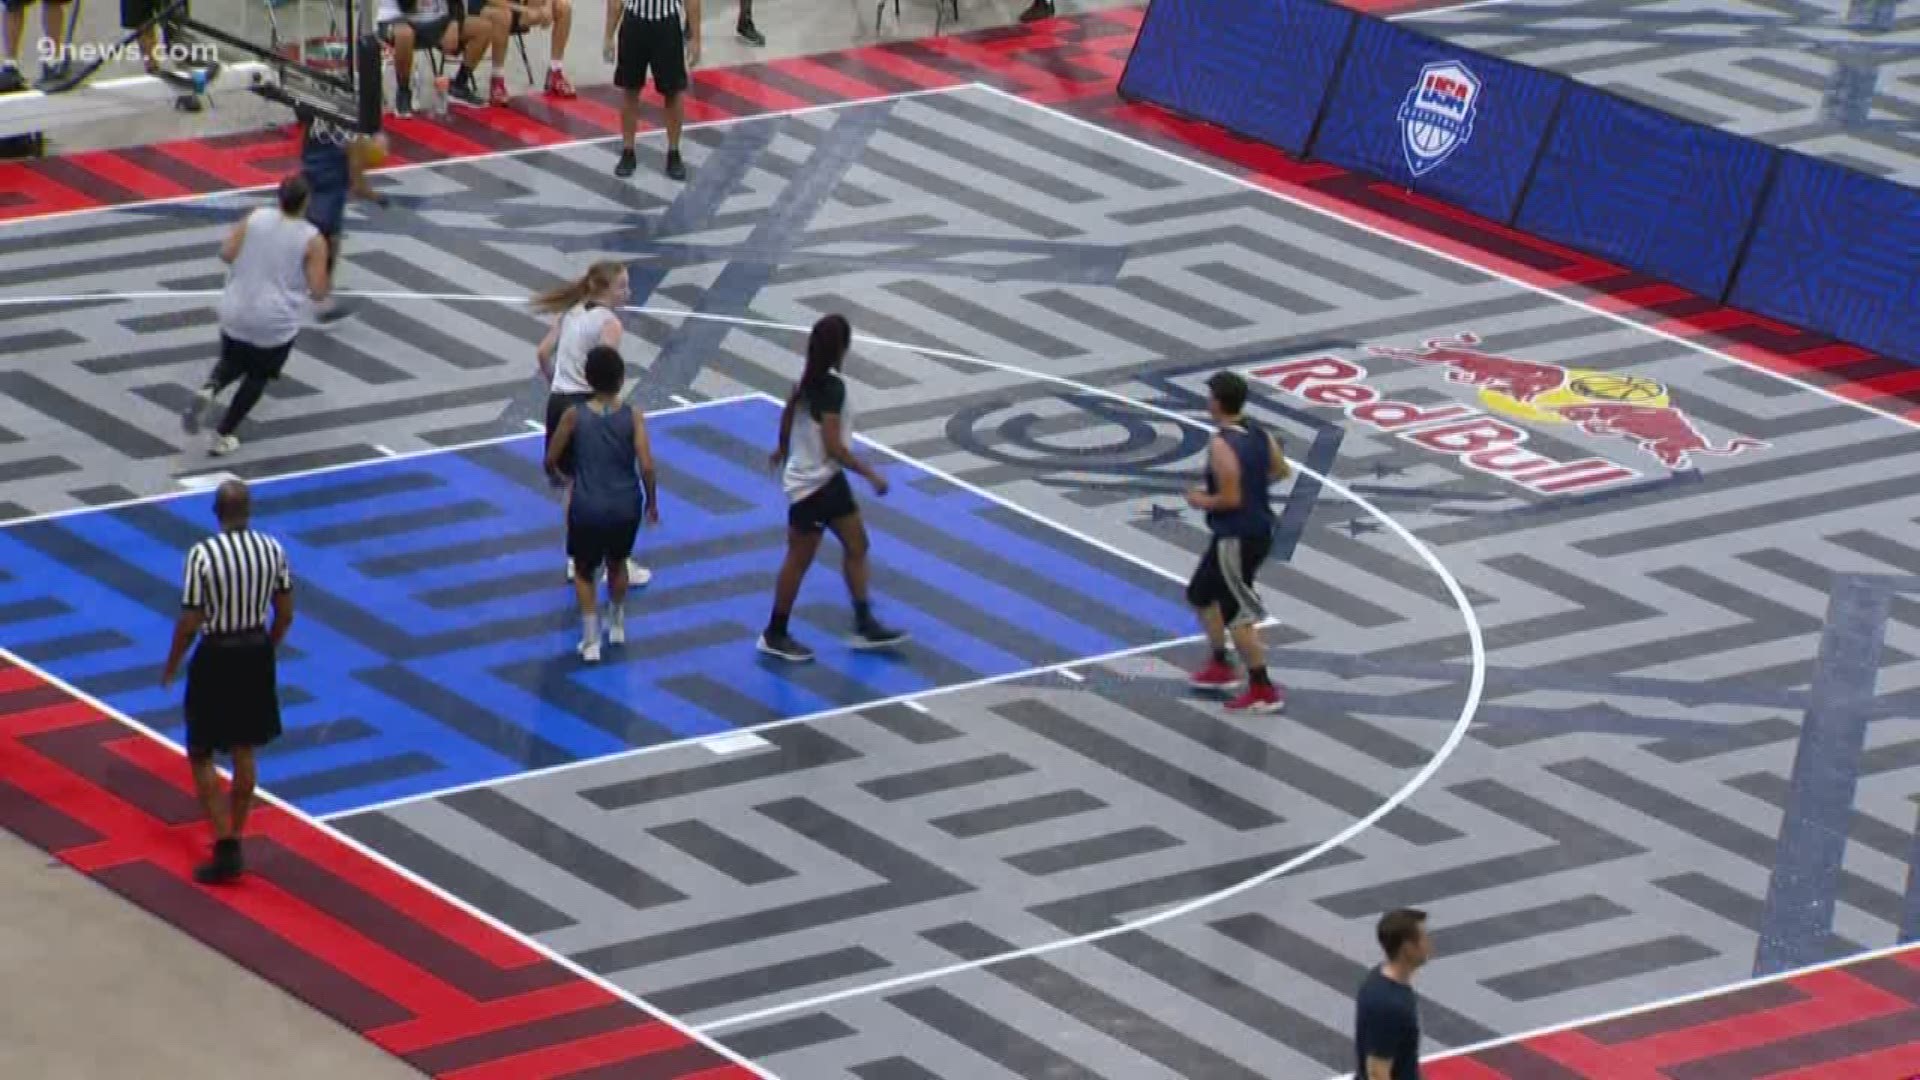 3x3  basketball will make its debut at the 2020 Olympics. Teams competed in Denver with the hope to qualify to compete in Tokyo.